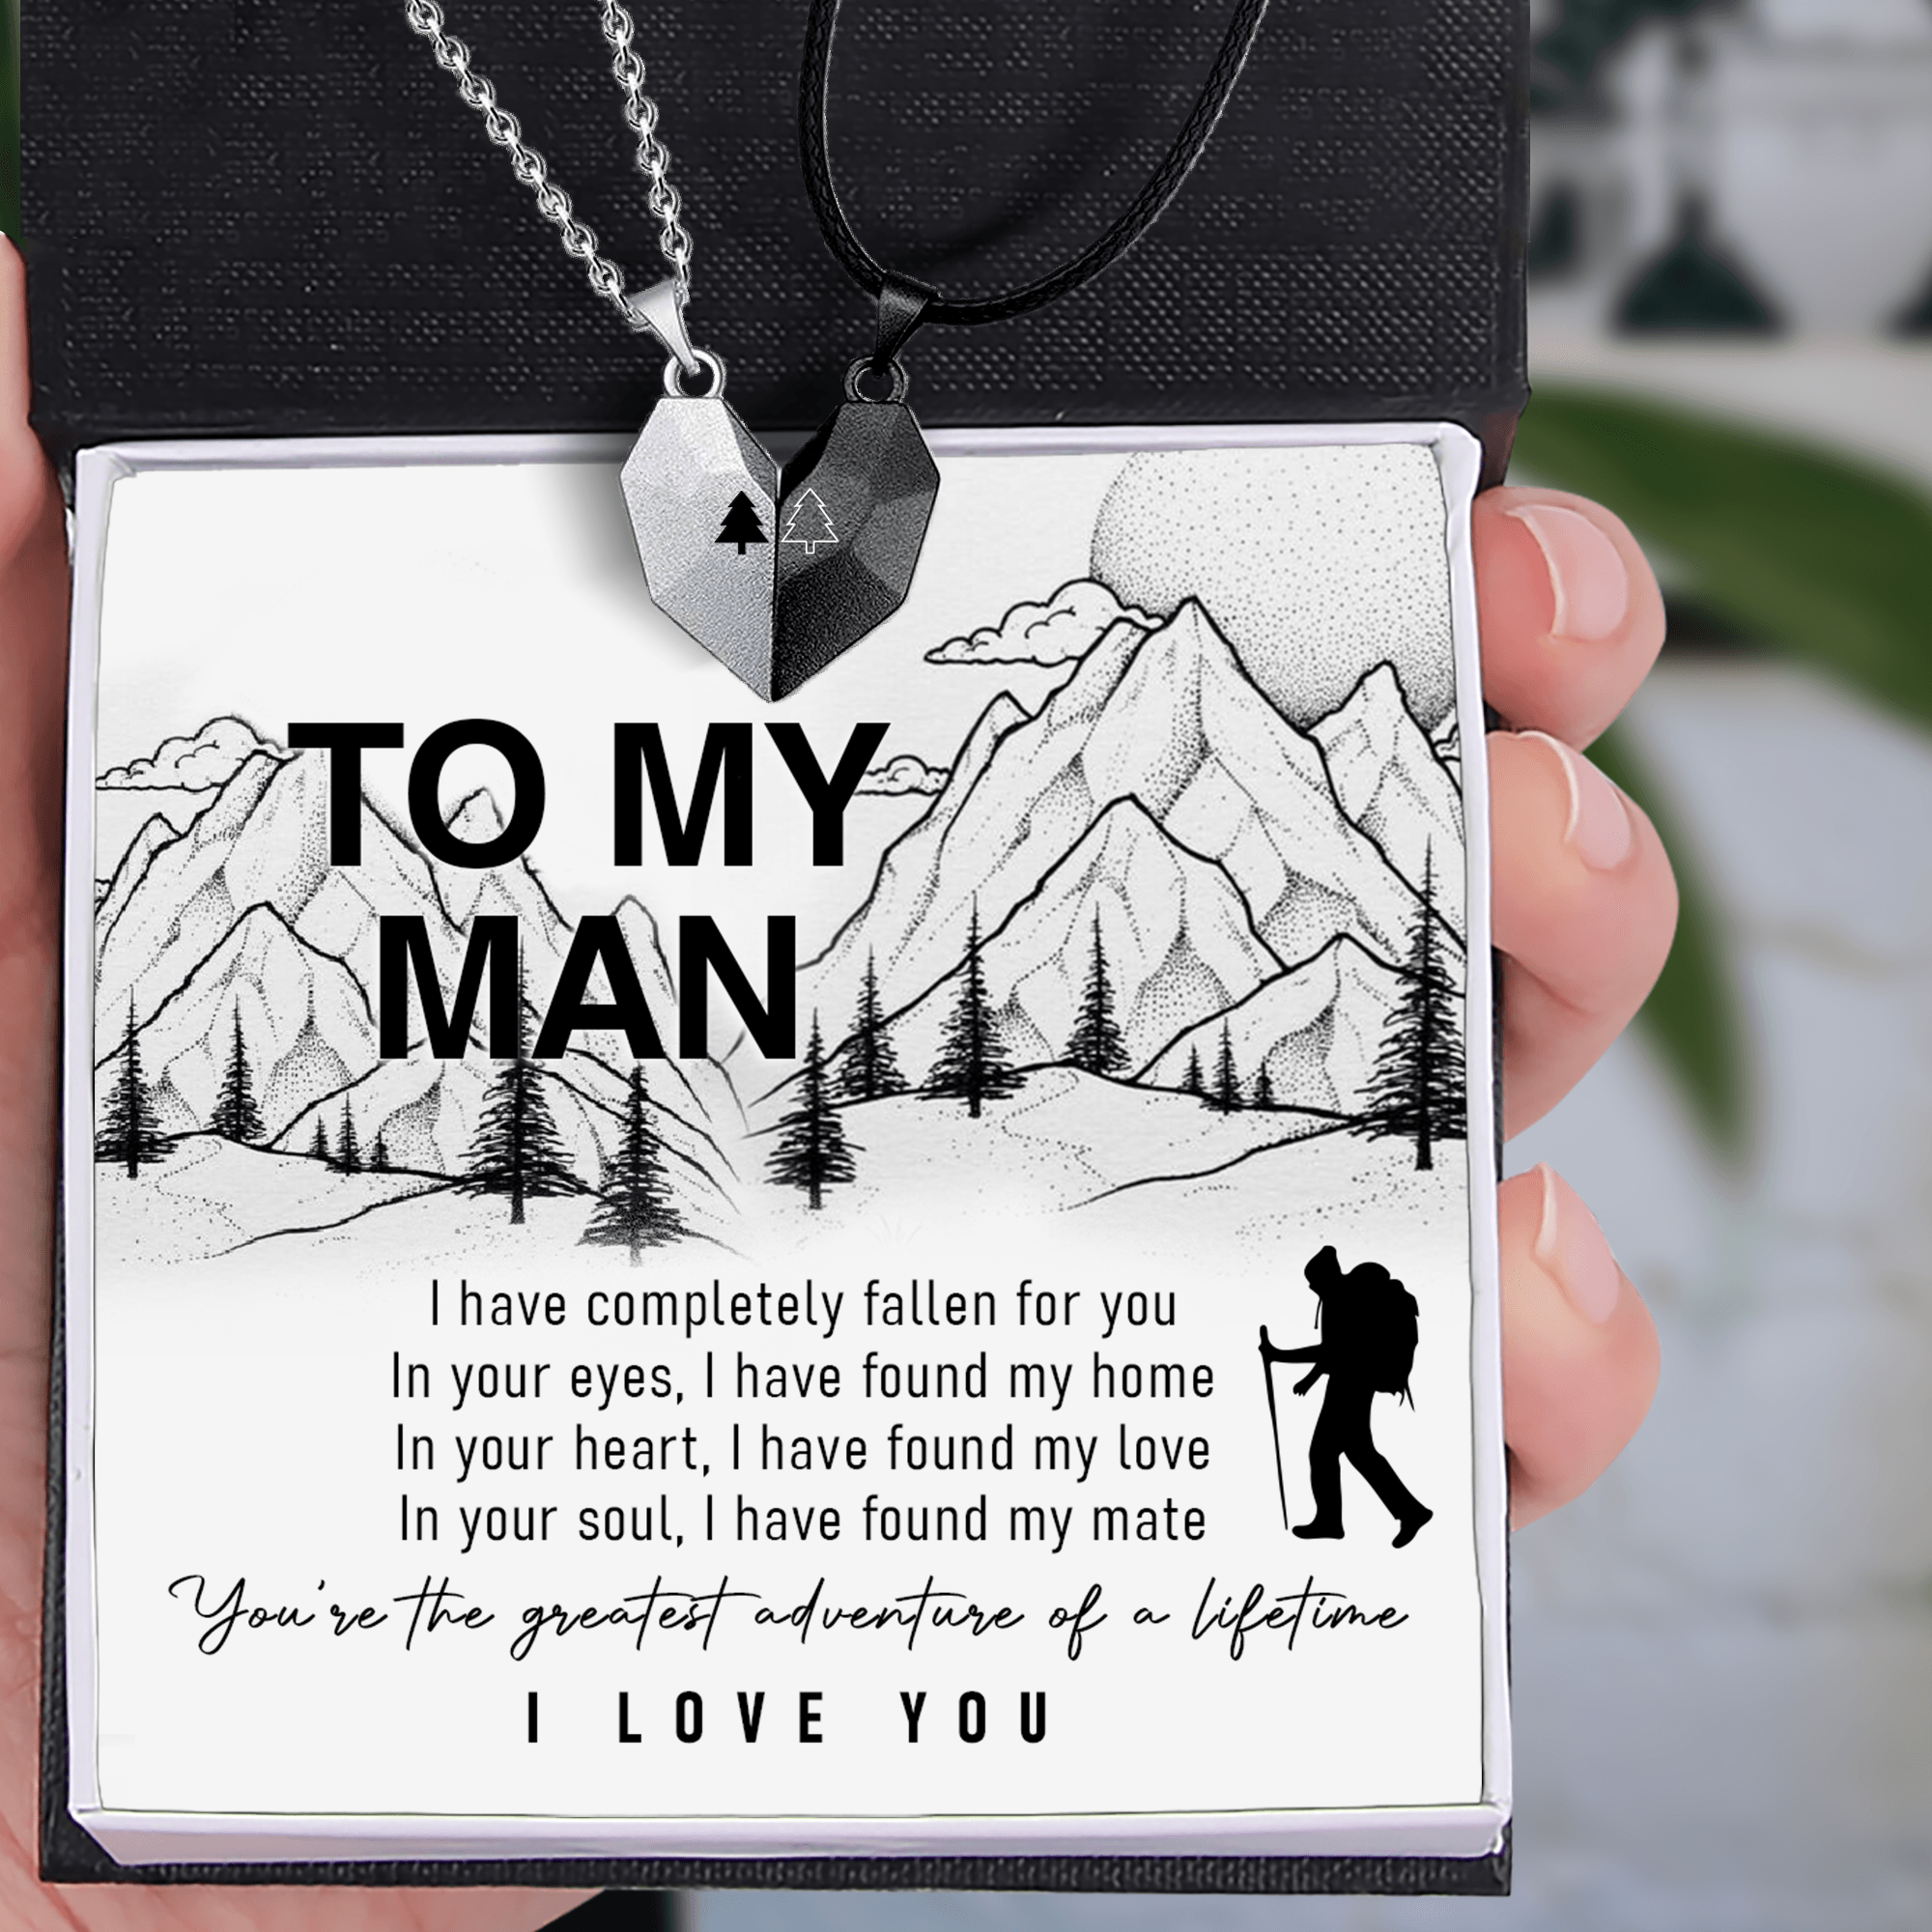 Magnetic Love Necklaces - Hiking - To My Man - You're The Greatest Adventure Of A Lifetime - Augnni26004 - Gifts Holder